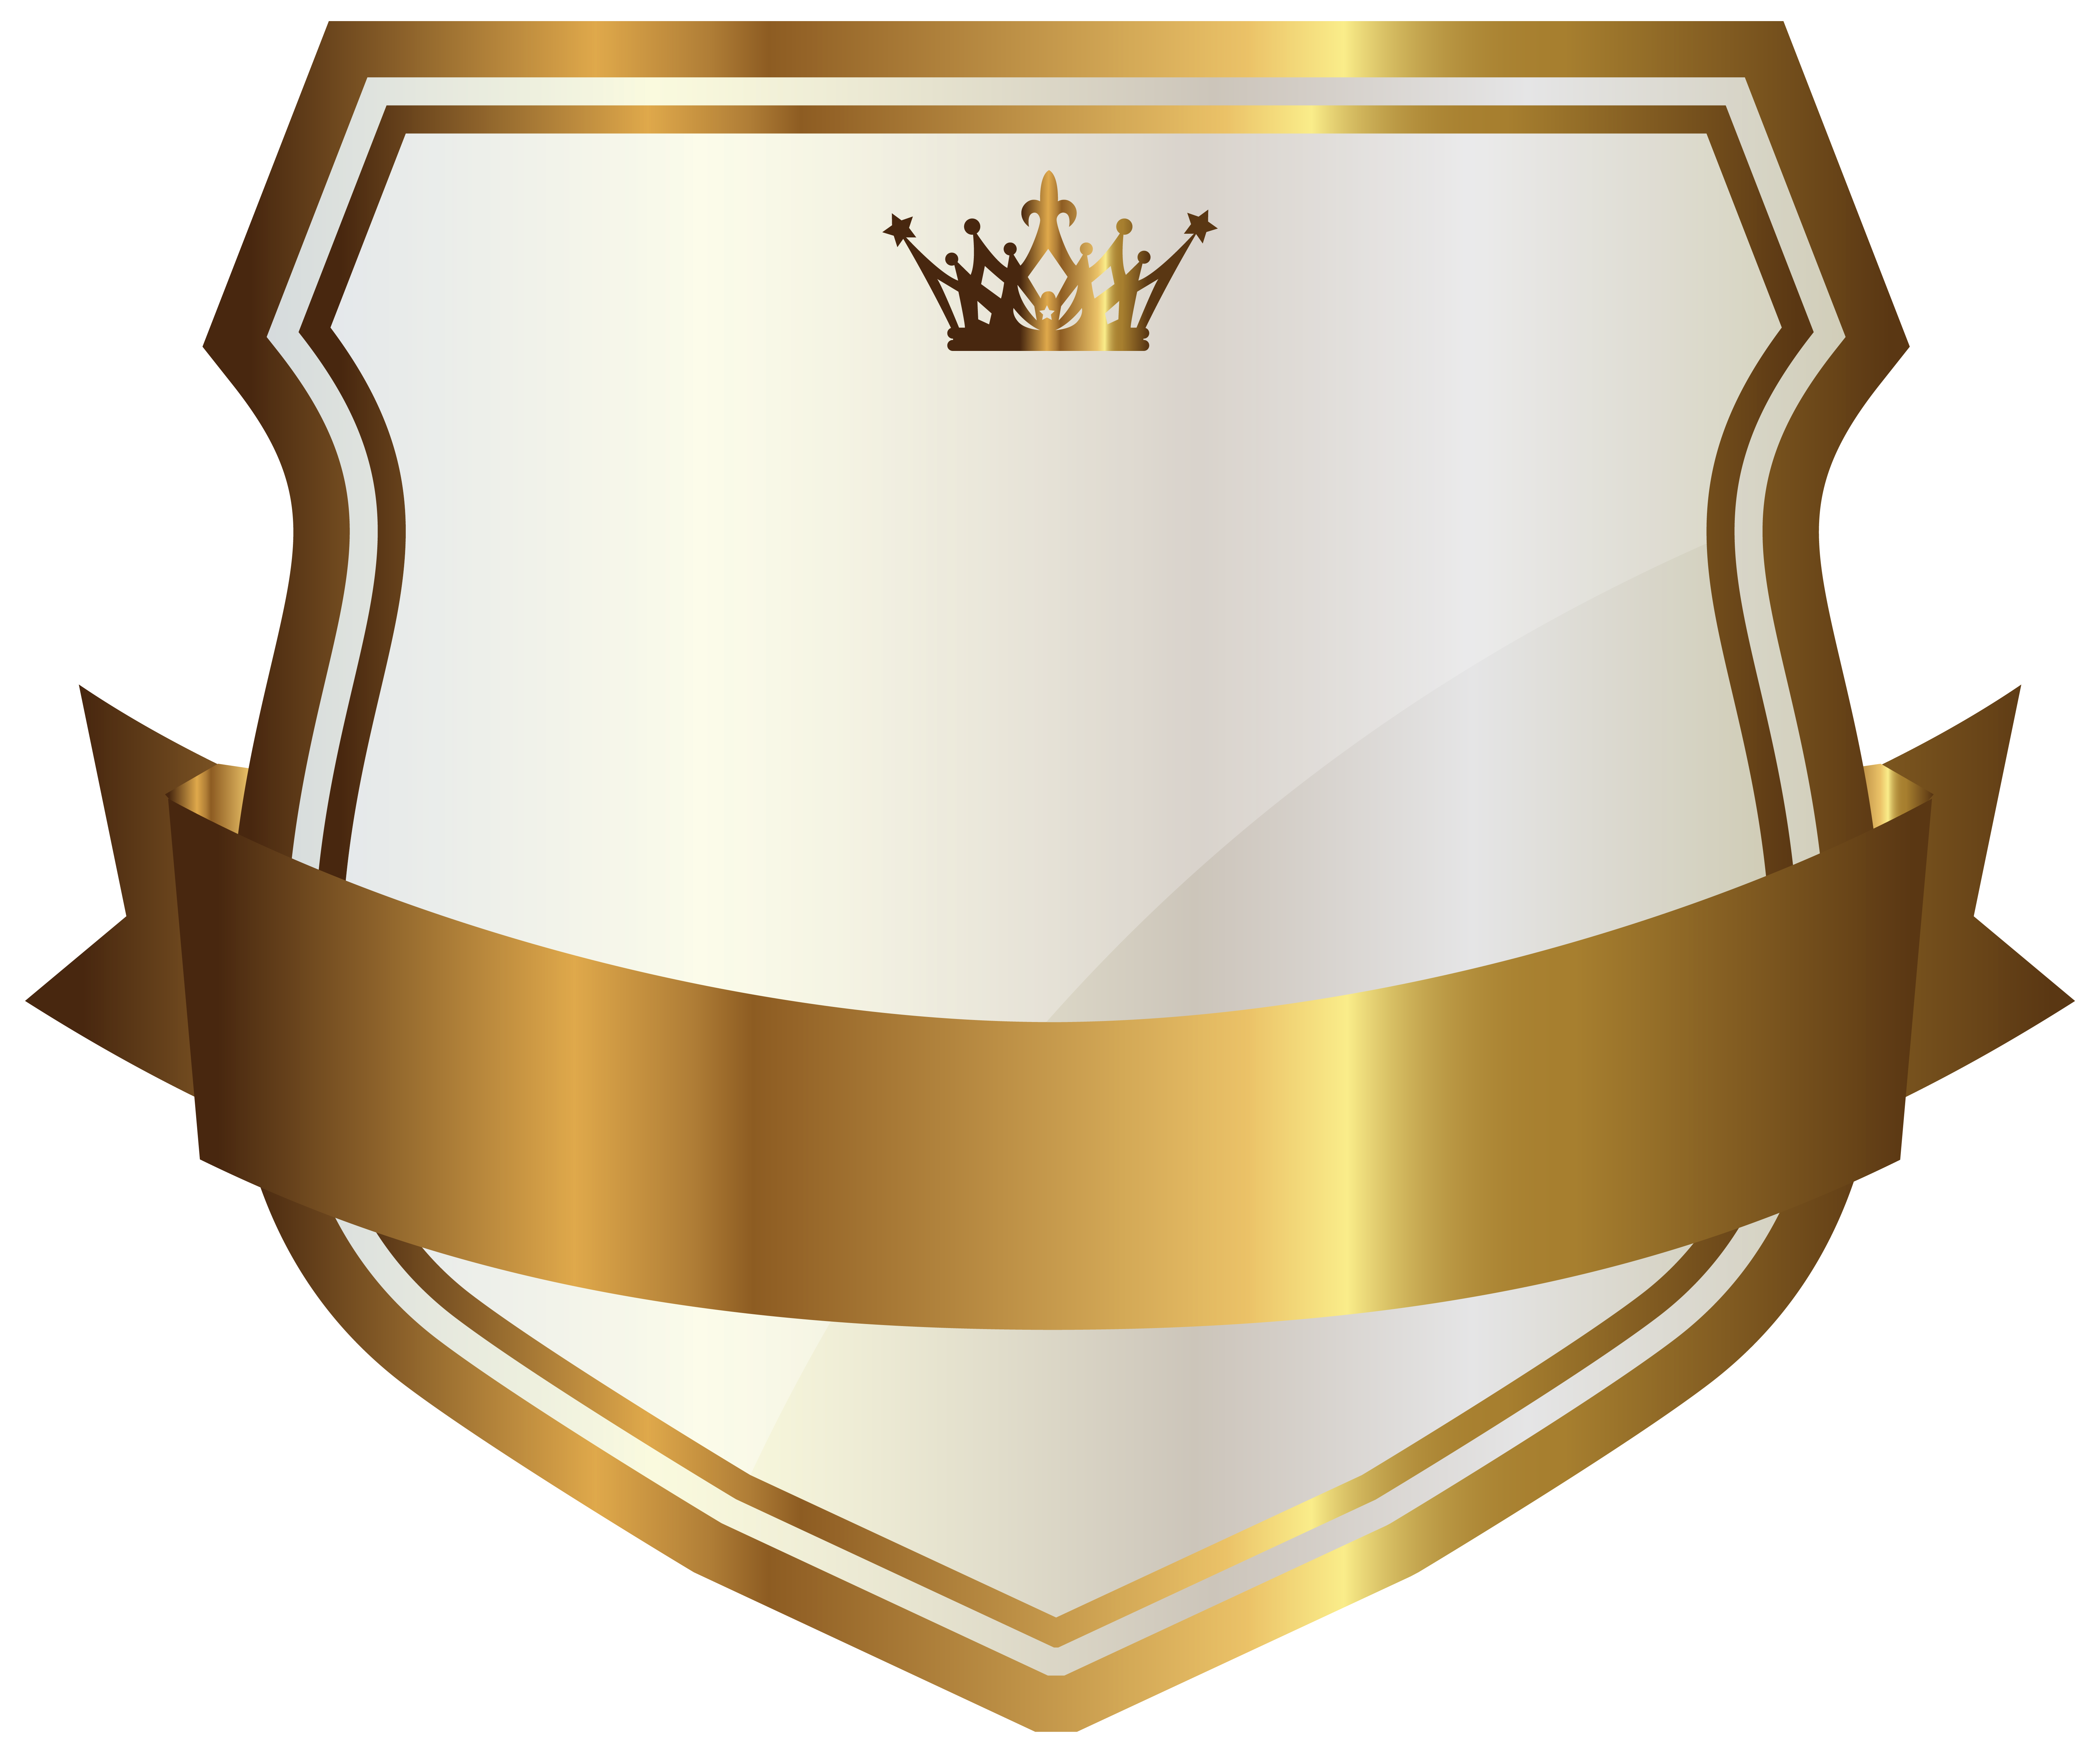 White label with gold. Clipart shield trophy